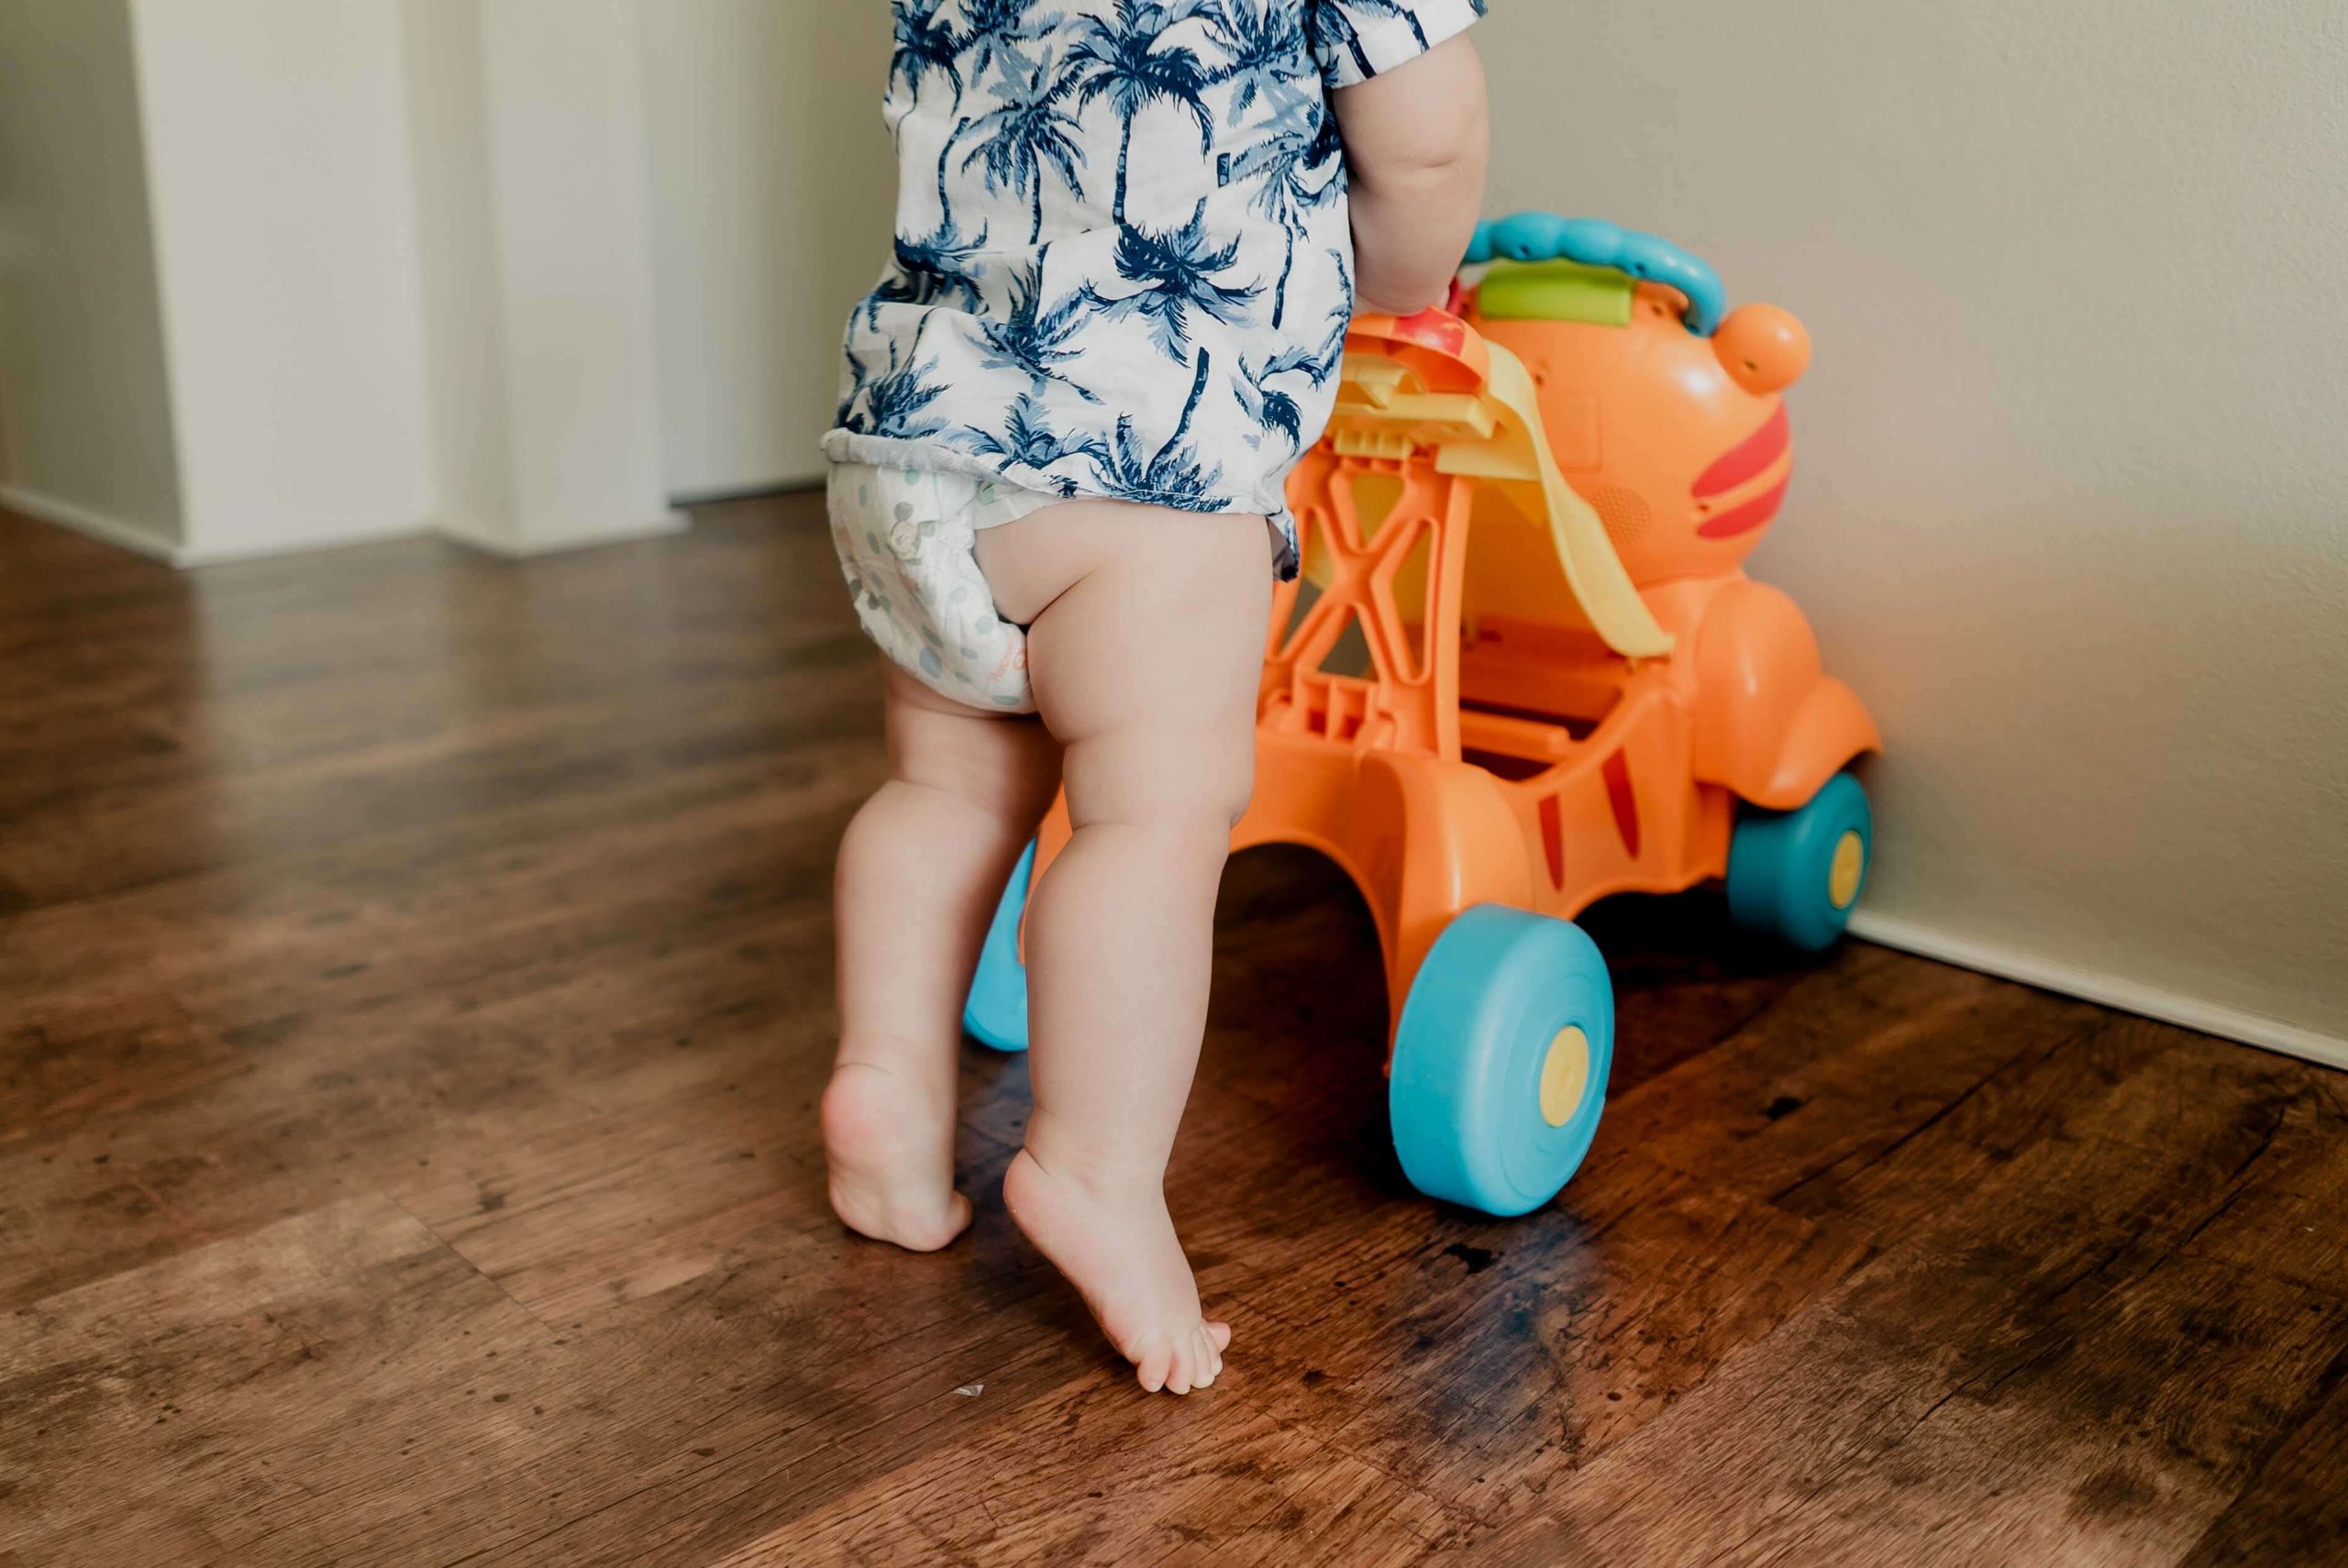 birthday films and photos: close-up of baby's legs pushing a baby walker